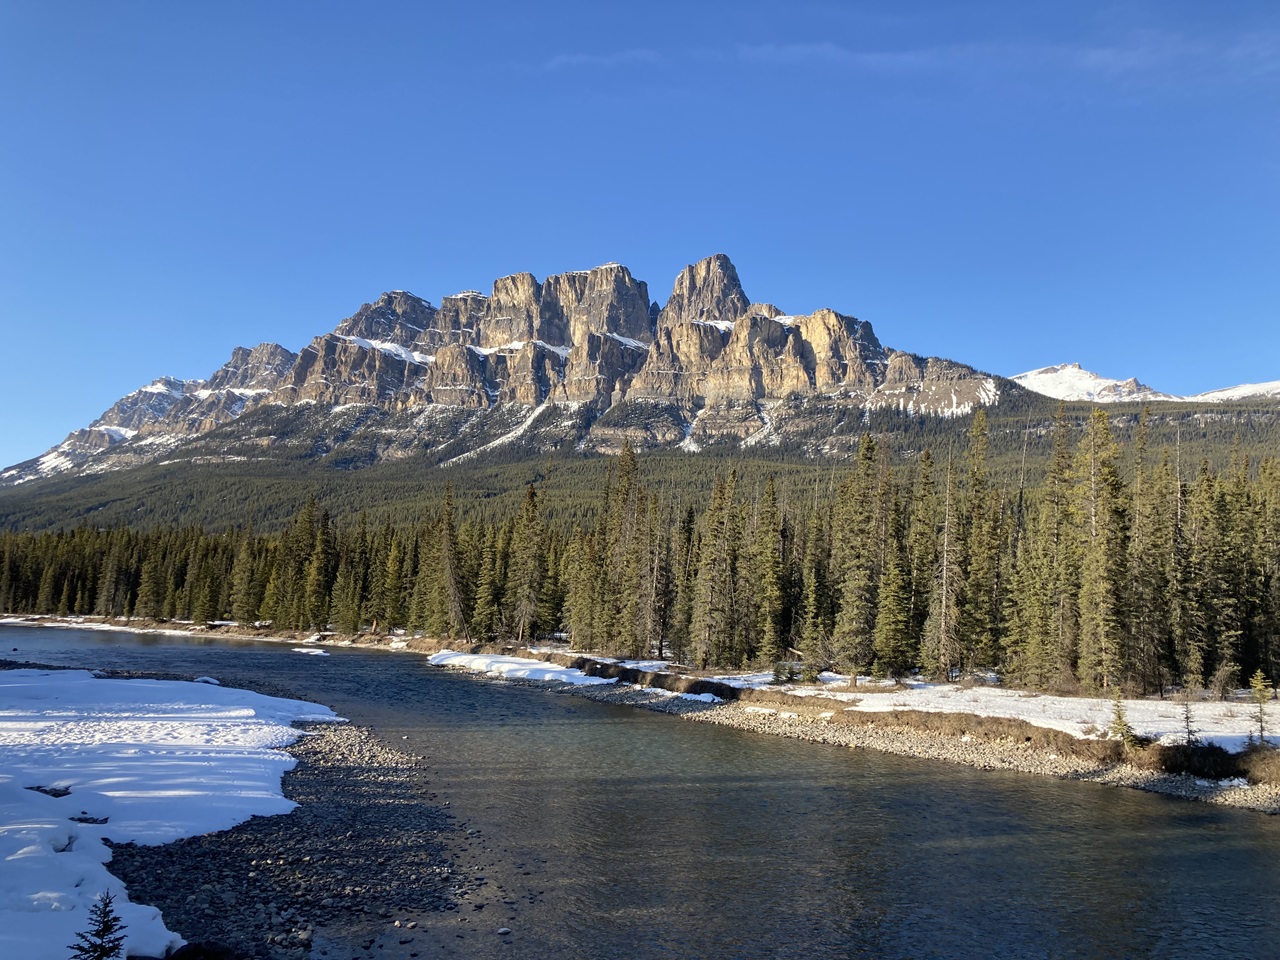 A view of Castle Mountain from the Bow River at a bridge crossing on Hwy 93, near the Bow Valley Parkway,